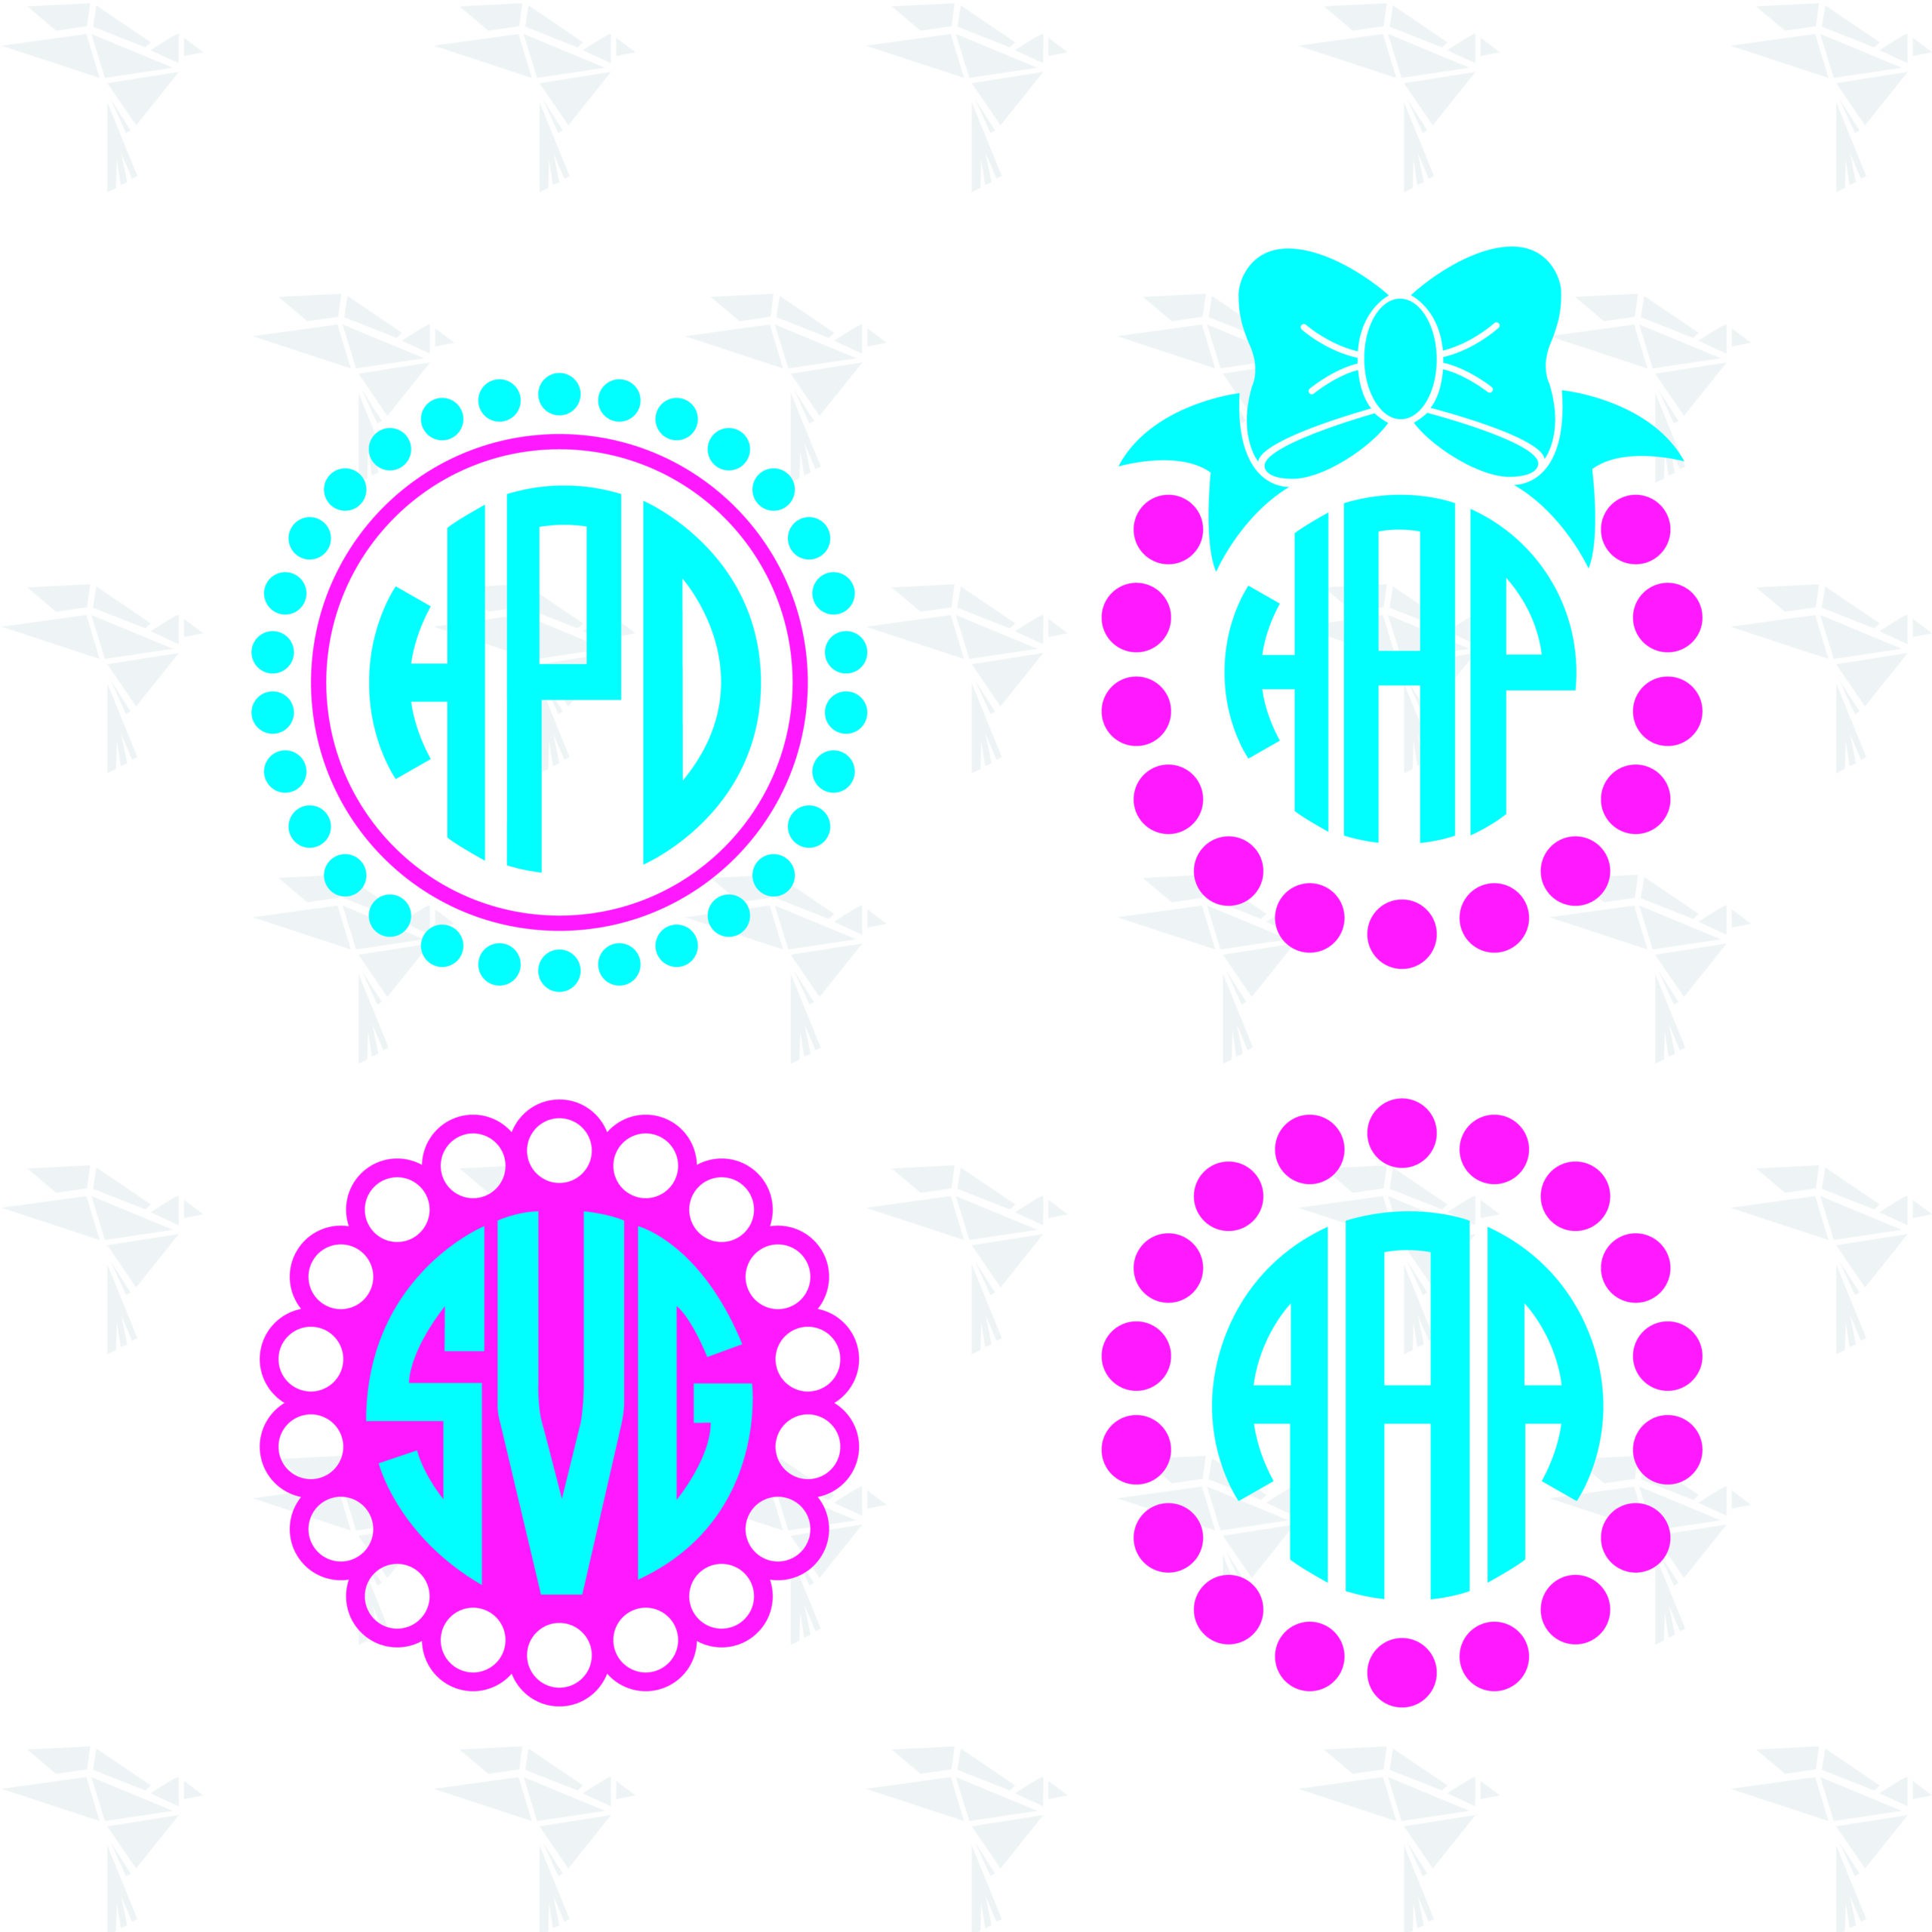 Dot Circle Monogram SVG, PNG, DXF. Instant download files for Cricut Design  Space, Silhouette, Cutting, Printing, or more